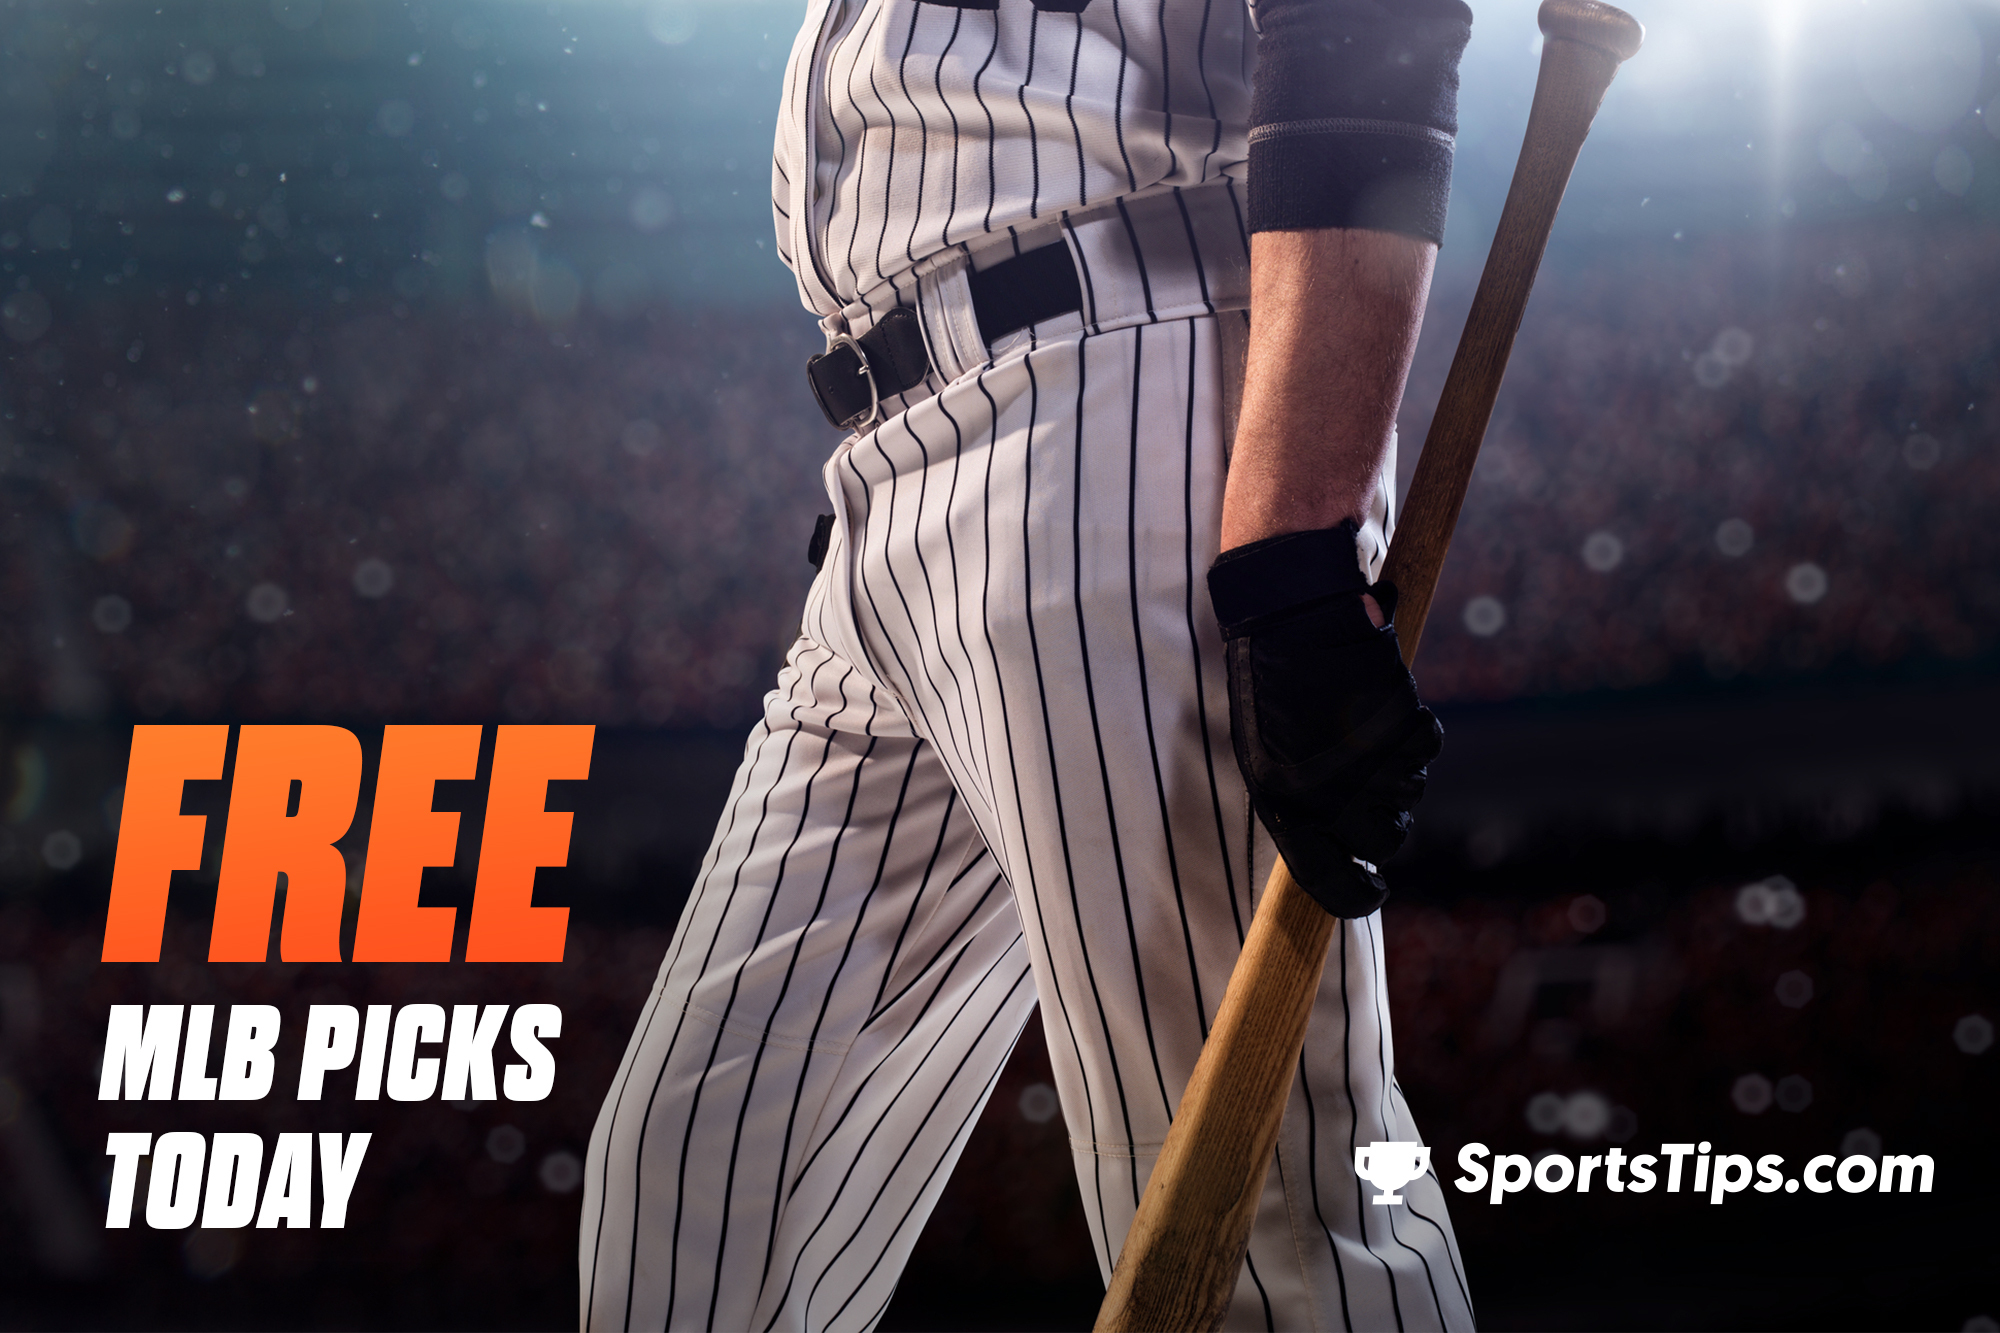 Free MLB Picks Today for Saturday, July 23rd, 2022